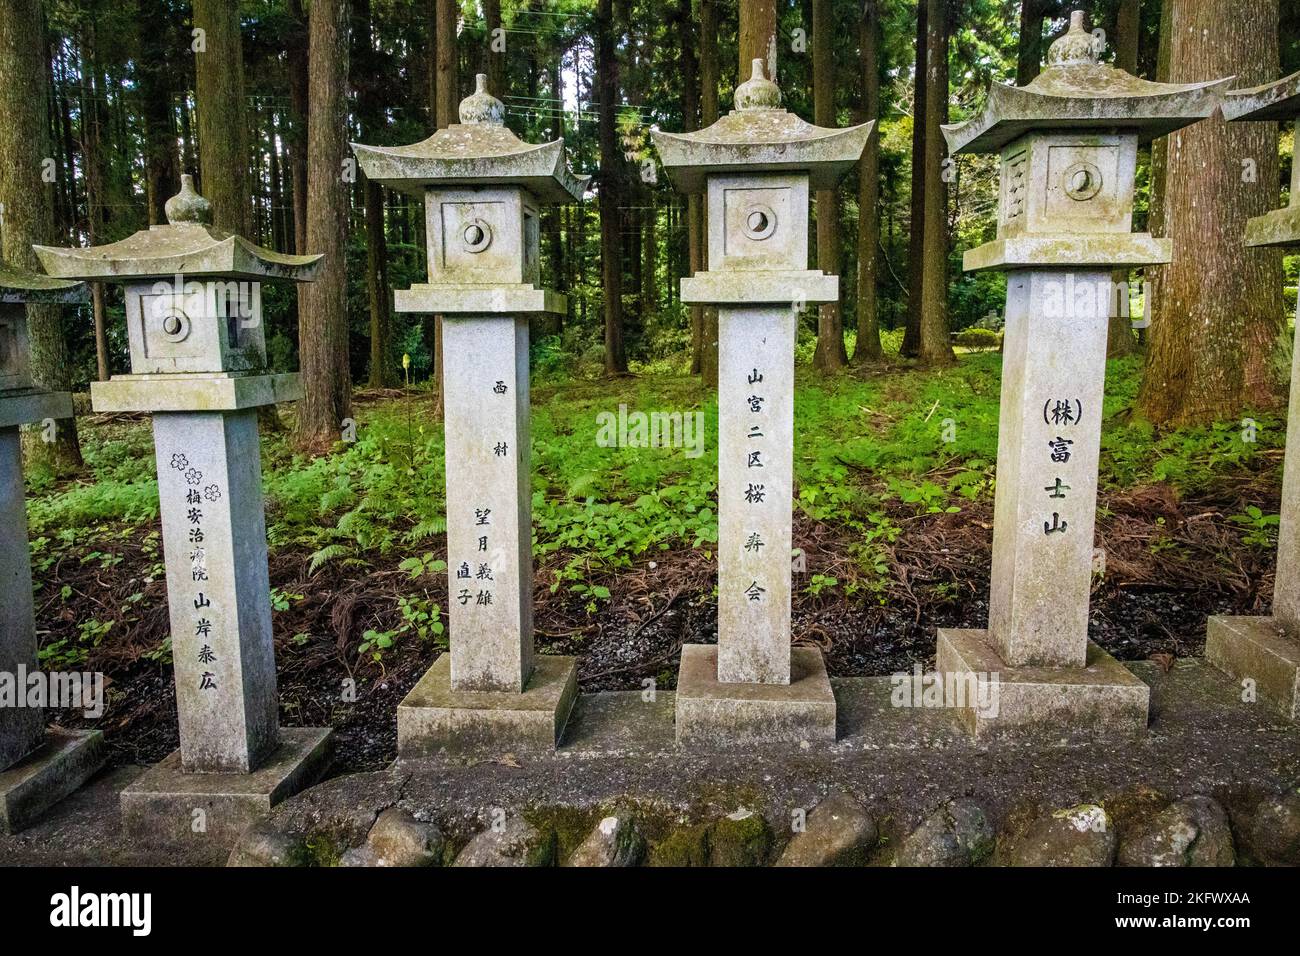 Japanese stone toro lanterns at shrine entrance in the forest Stock Photo